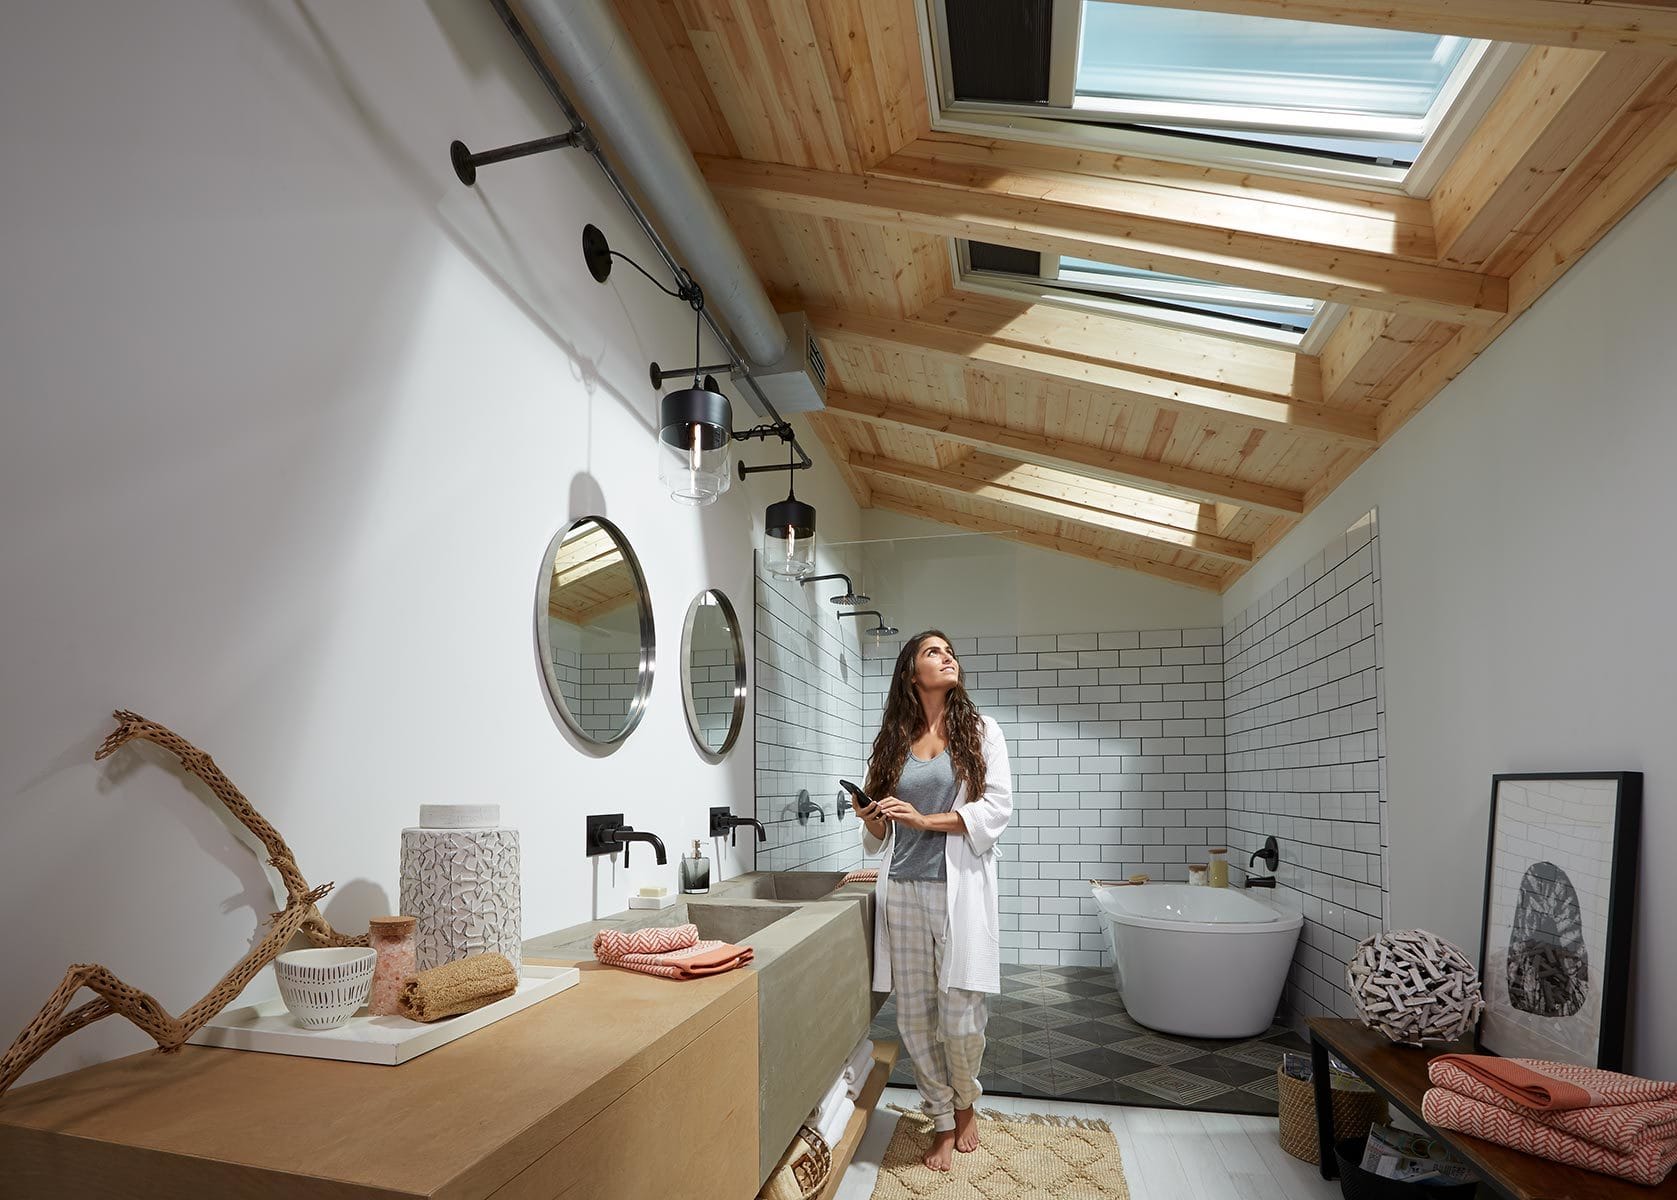 Woman looks up at three skylights in a narrow white bathroom